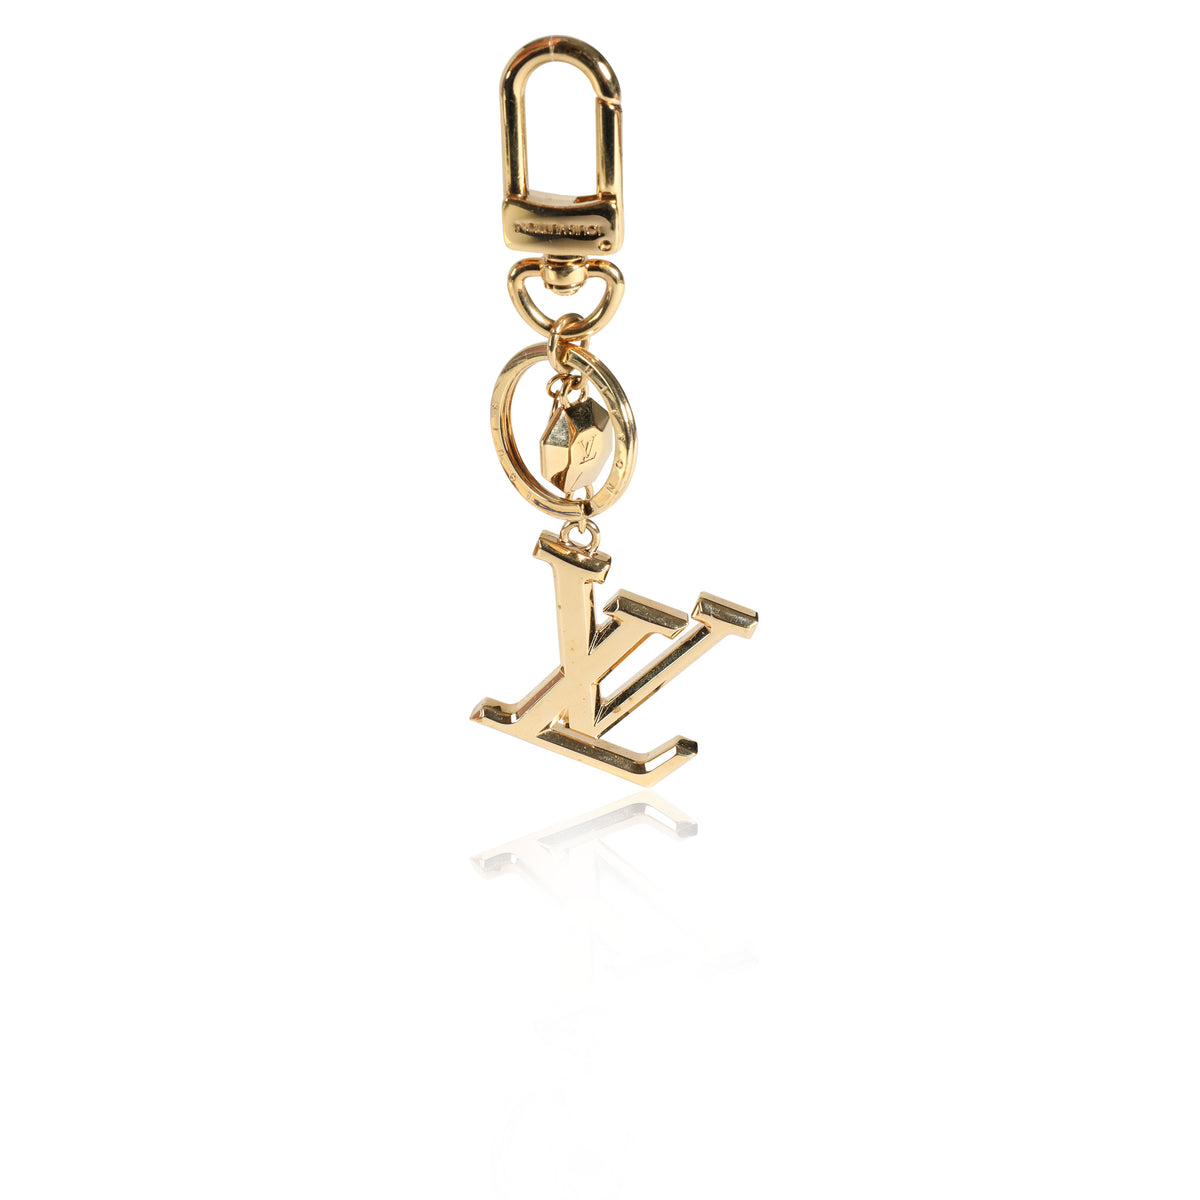 Products by Louis Vuitton: LV Facettes Bag Charm & Key Holder